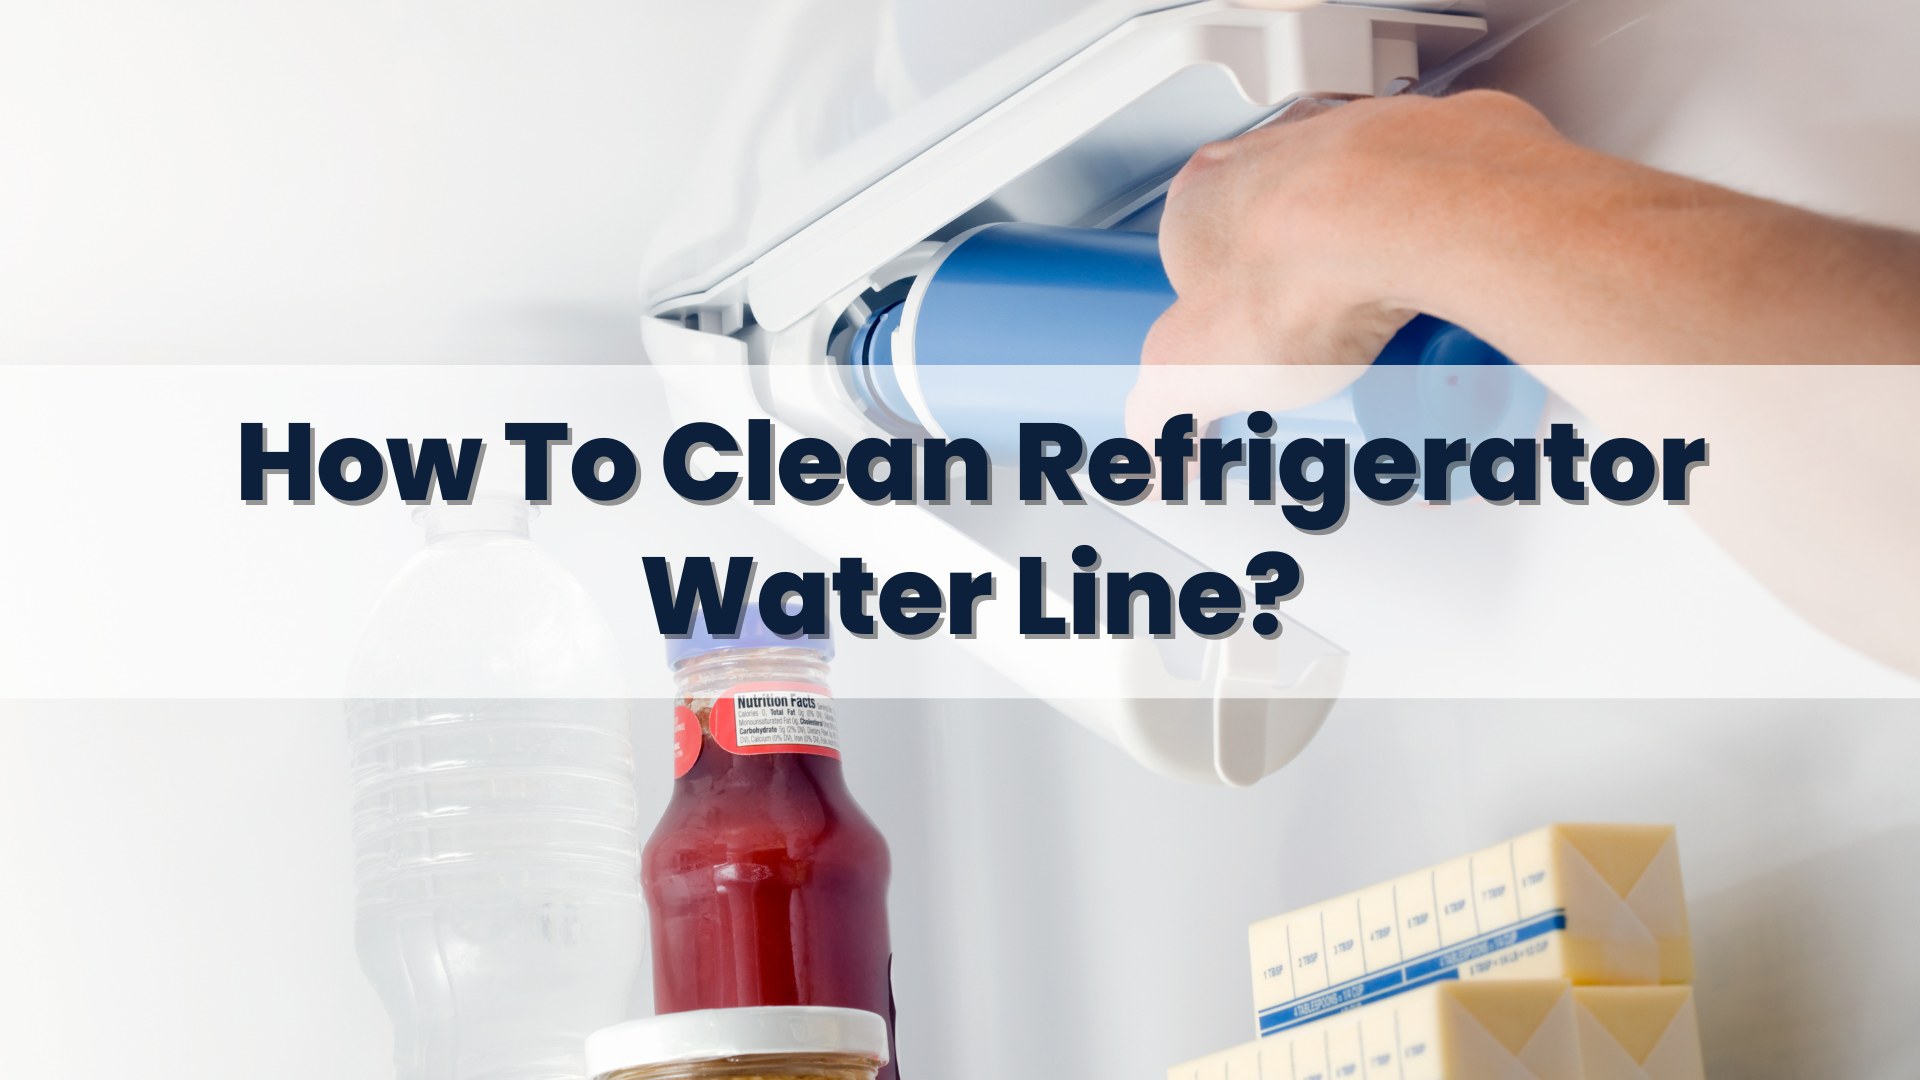 How To Clean Refrigerator Water Line